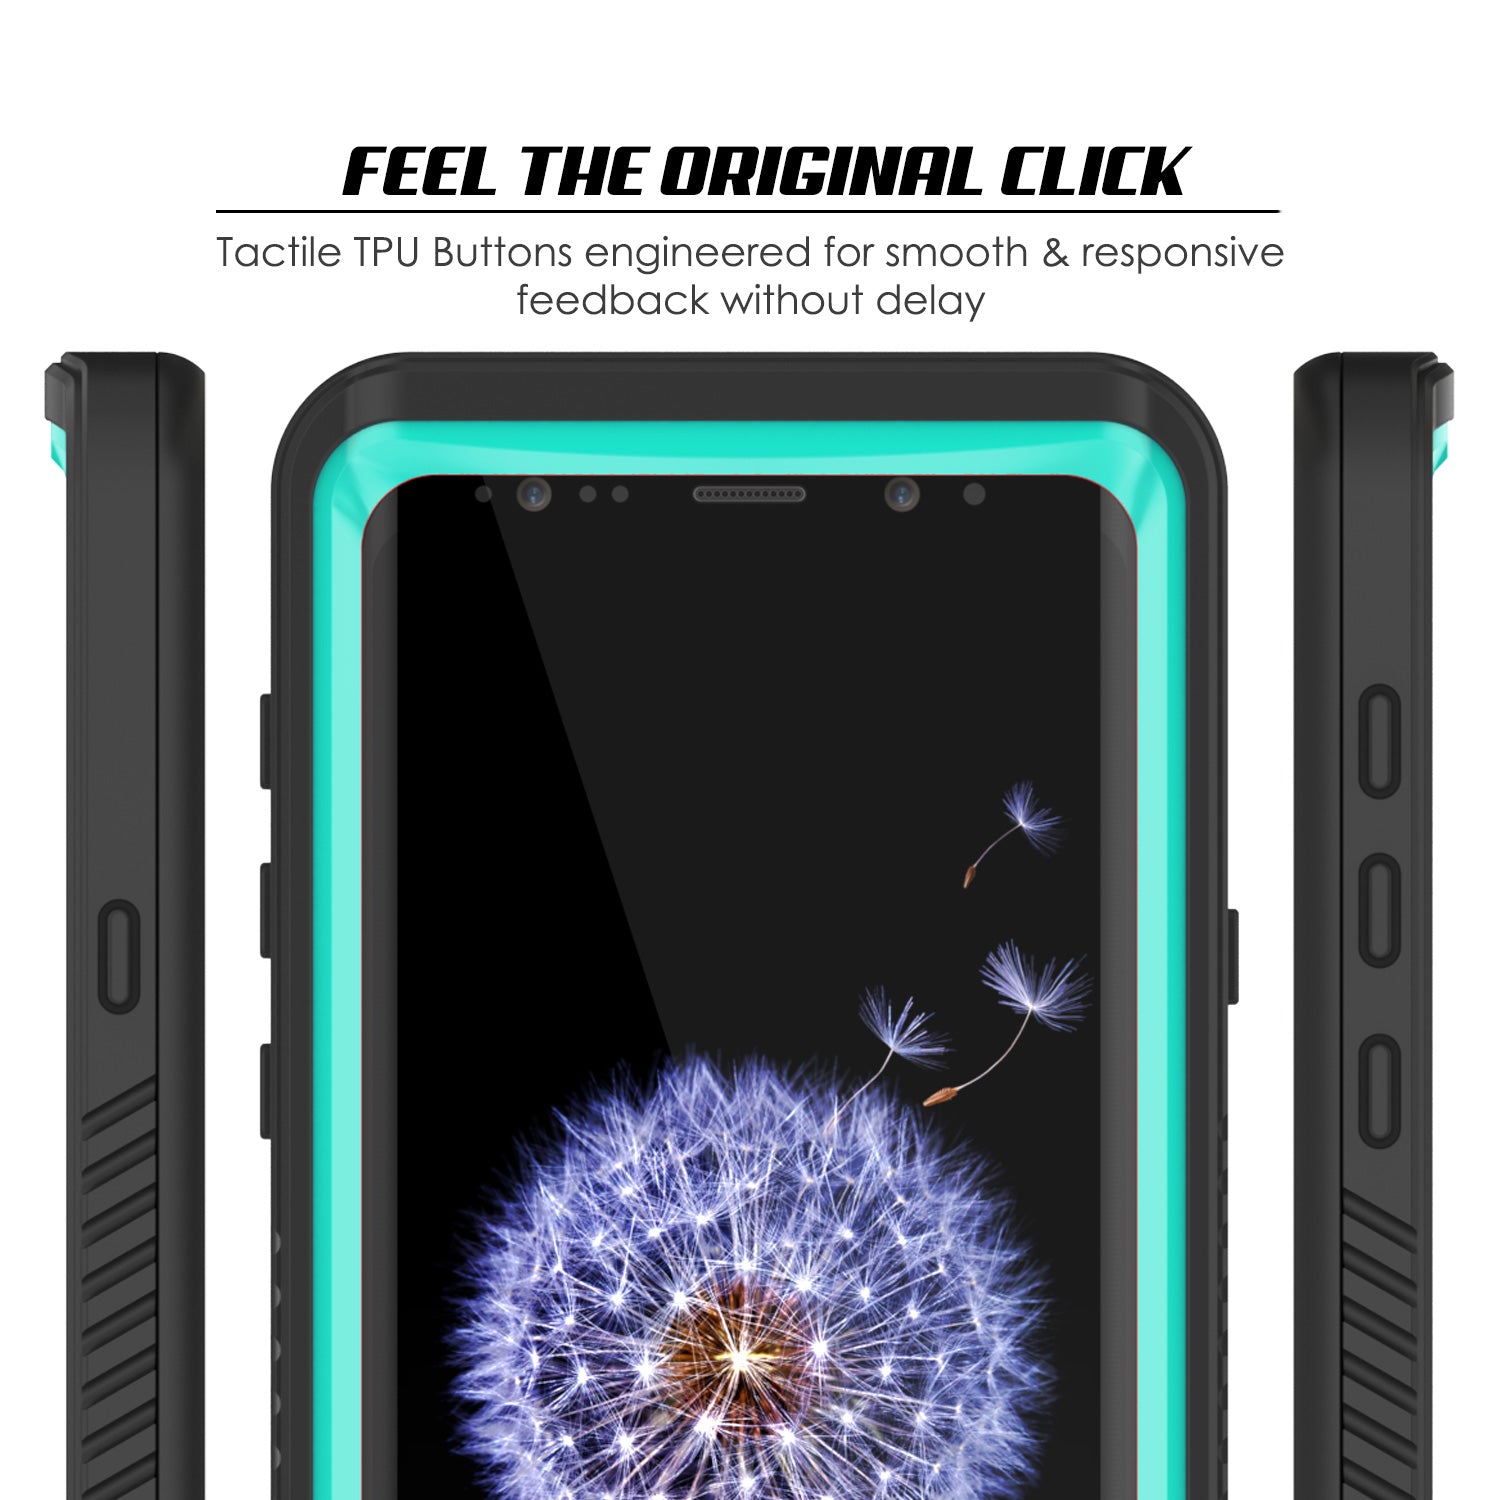 Punkcase Galaxy S9+ Plus Extreme Series Waterproof Body | Teal